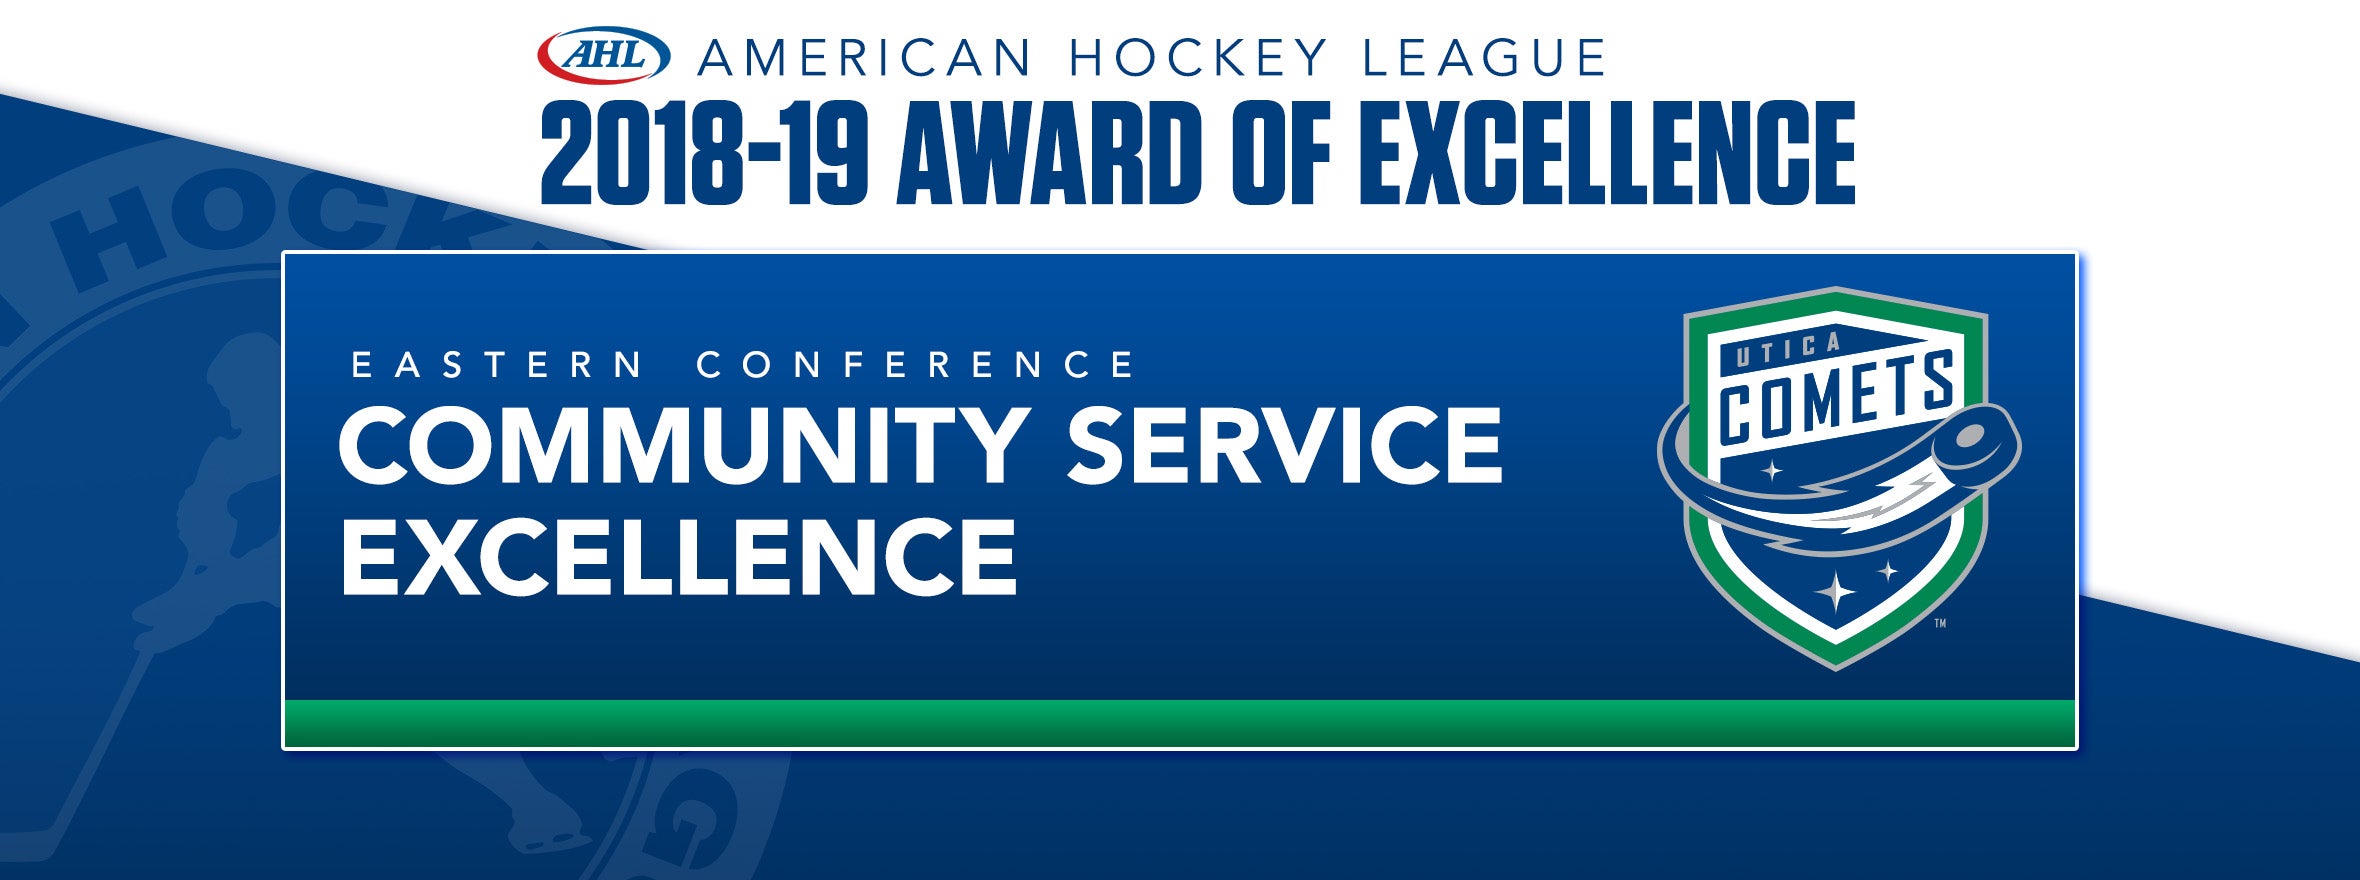 COMETS WIN COMMUNITY SERVICE EXCELLENCE AWARD